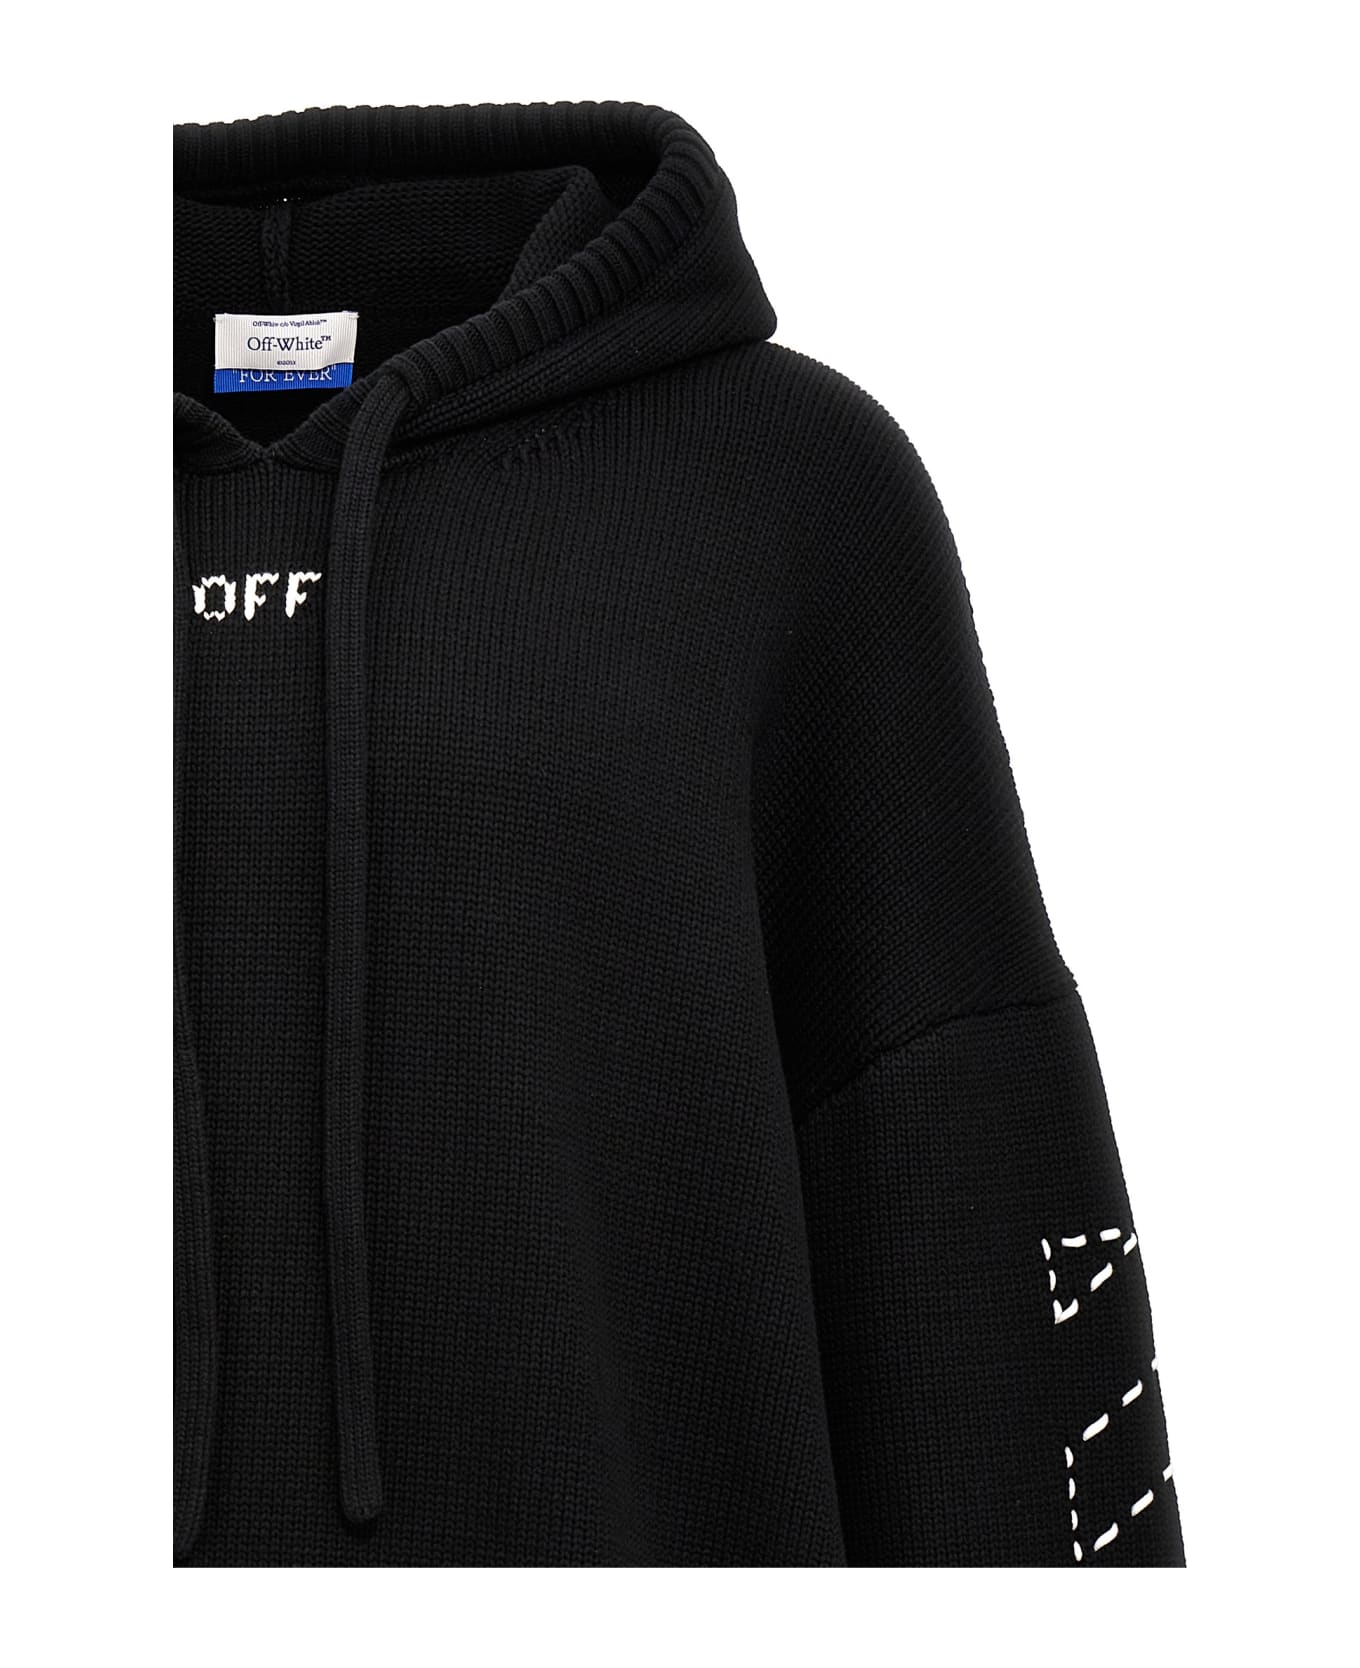 Off-White 'stitch Arr Diags' Hooded Sweater - White/Black フリース